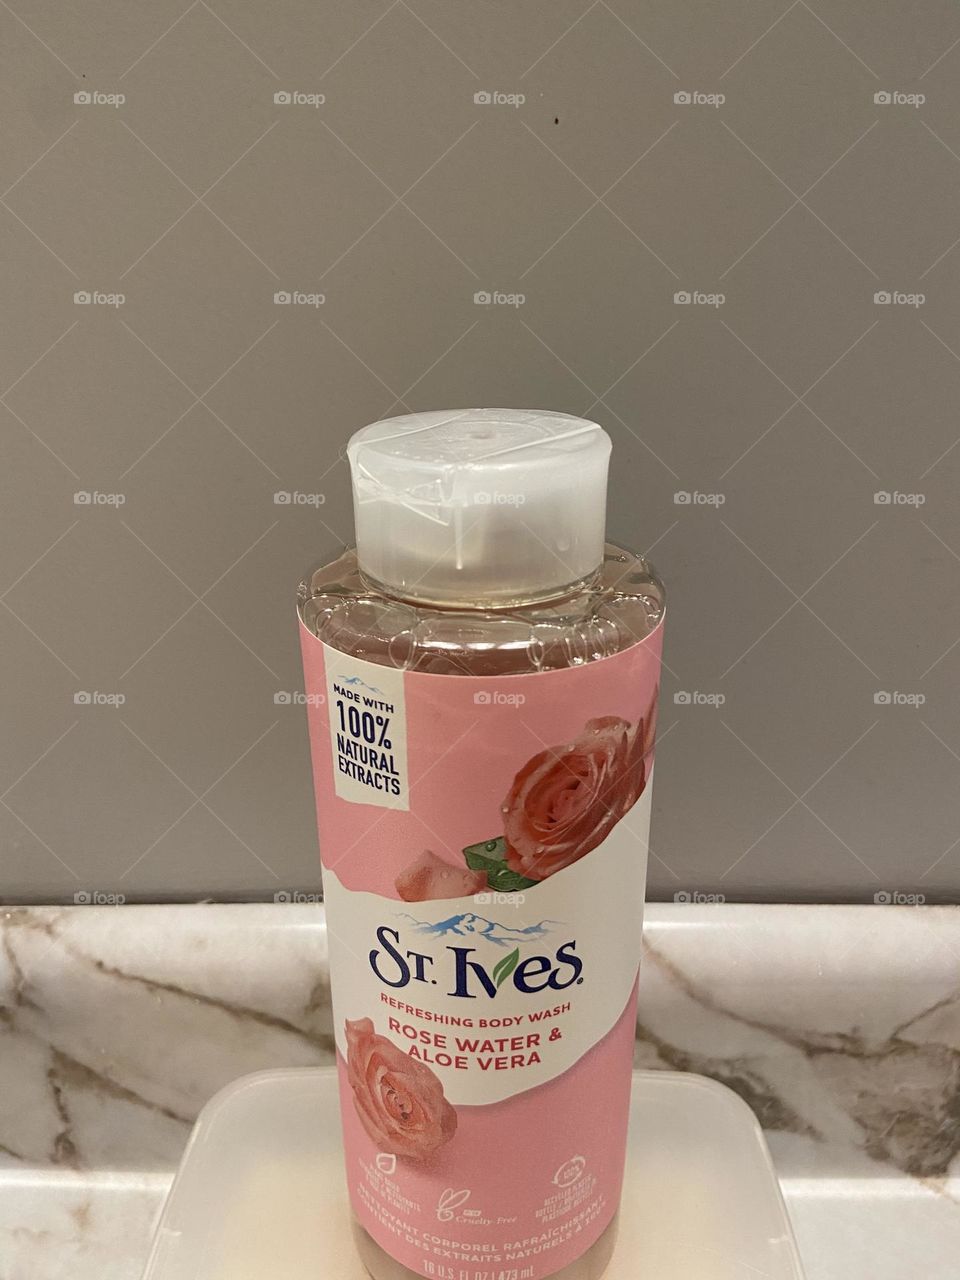 A photo of St. Ives Rose Water & Aloe Vera Refreshing Body Wash. I love body wash and this is one of my favorites. It’s light and nicely scented, and I love the packaging. It’s affordable too which doesn’t hurt. 